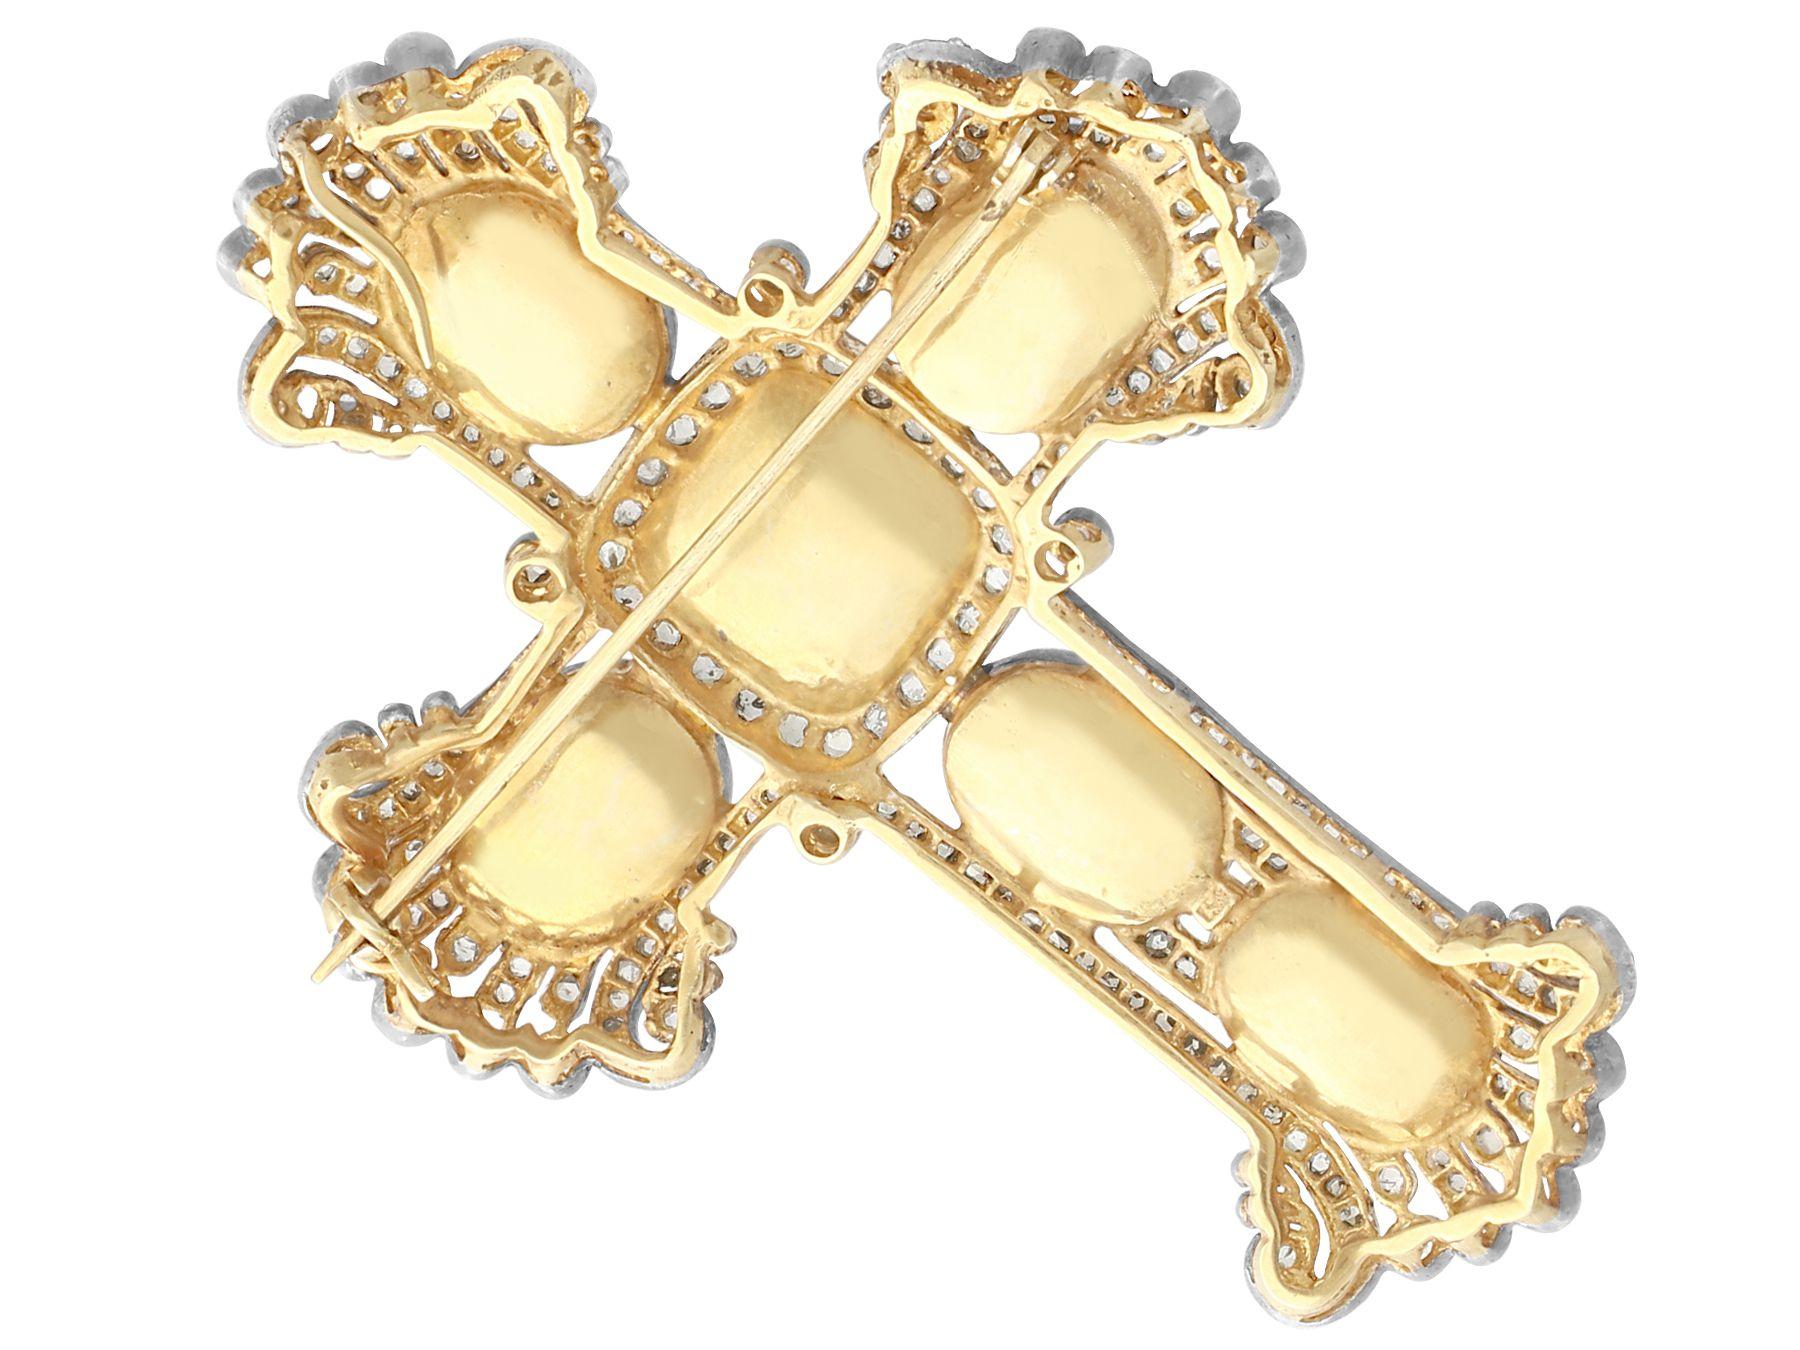 Antique 20.34 Carat Opal and 4.63 Carat Diamond Silver Gilt Cross Pendant Brooch In Excellent Condition For Sale In Jesmond, Newcastle Upon Tyne